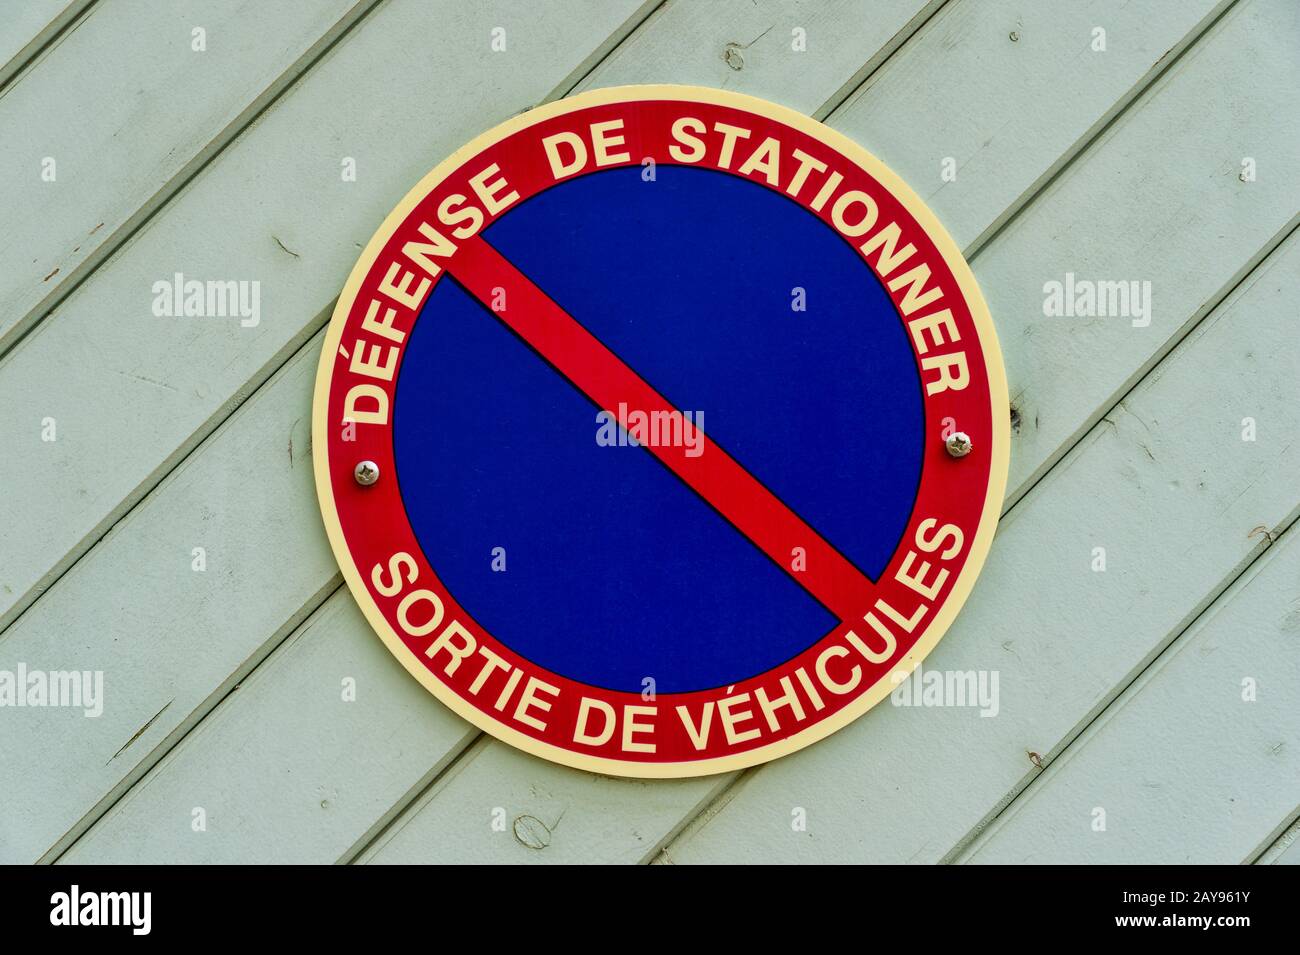 No parking sign in France Stock Photo